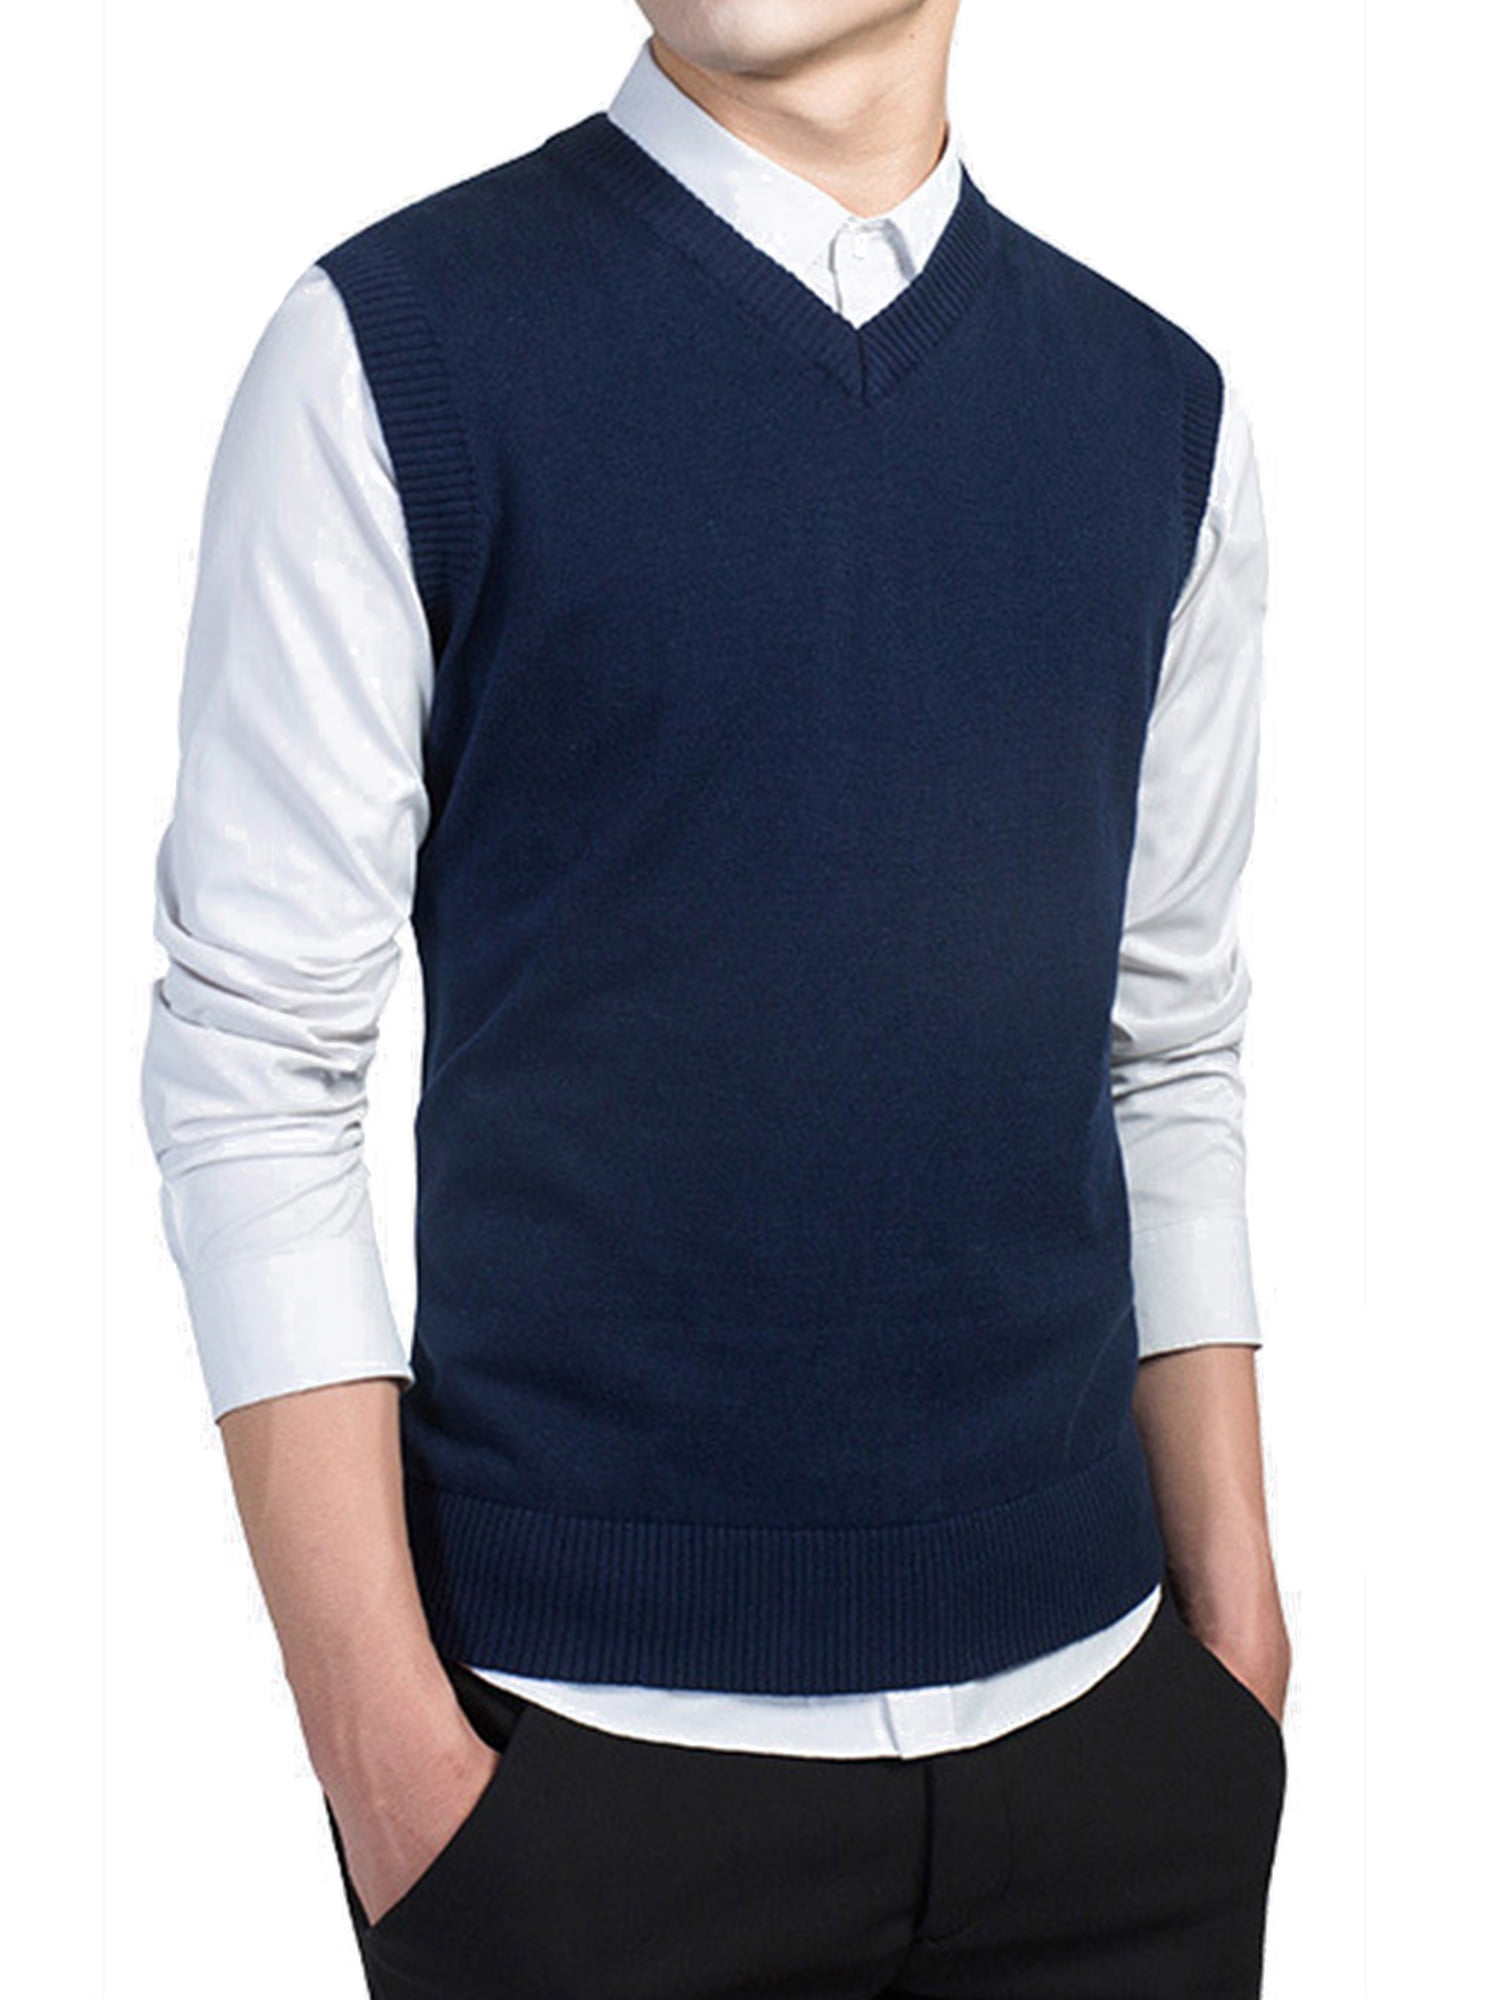 Yingqible Mens Casual Slim Fit V Neck Sweater Vest Argyle Pullover Knit Vest Thermal 